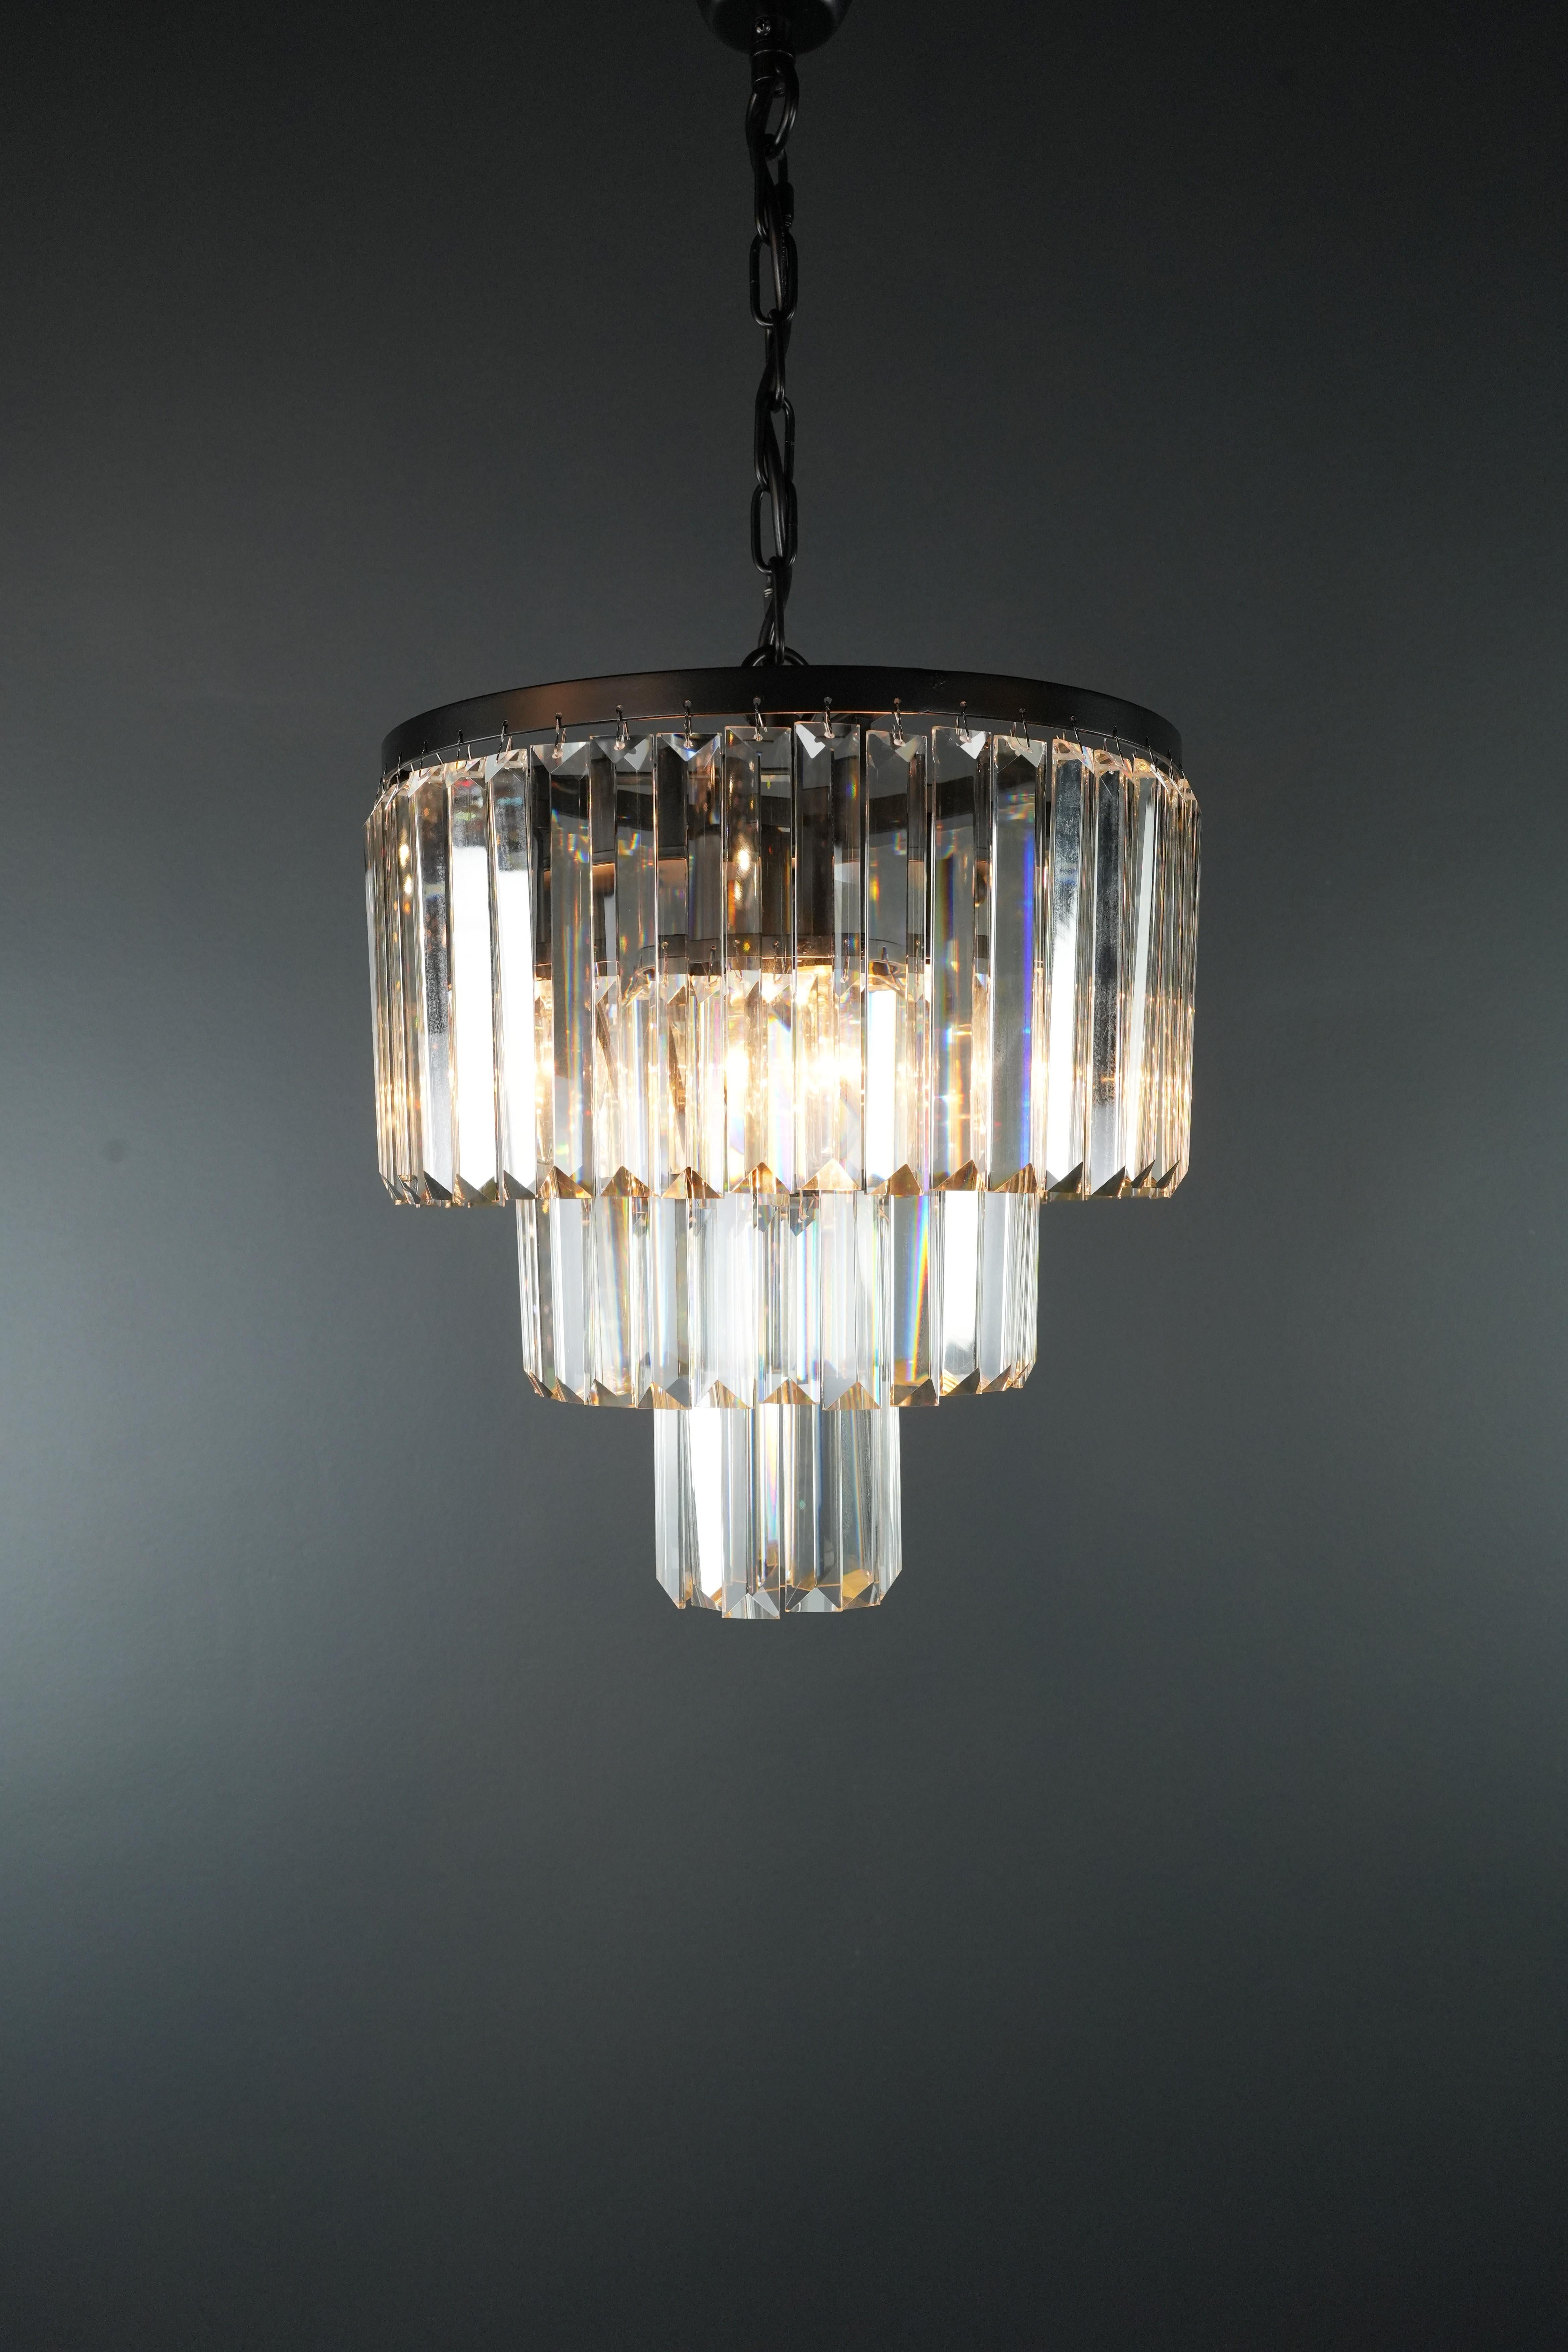 Immerse yourself in the fascinating world of postmodernism and experience pure elegance with our breathtaking black chandelier decorated with crystals. This work of art of lighting makes a statement in any room and gives your interior an